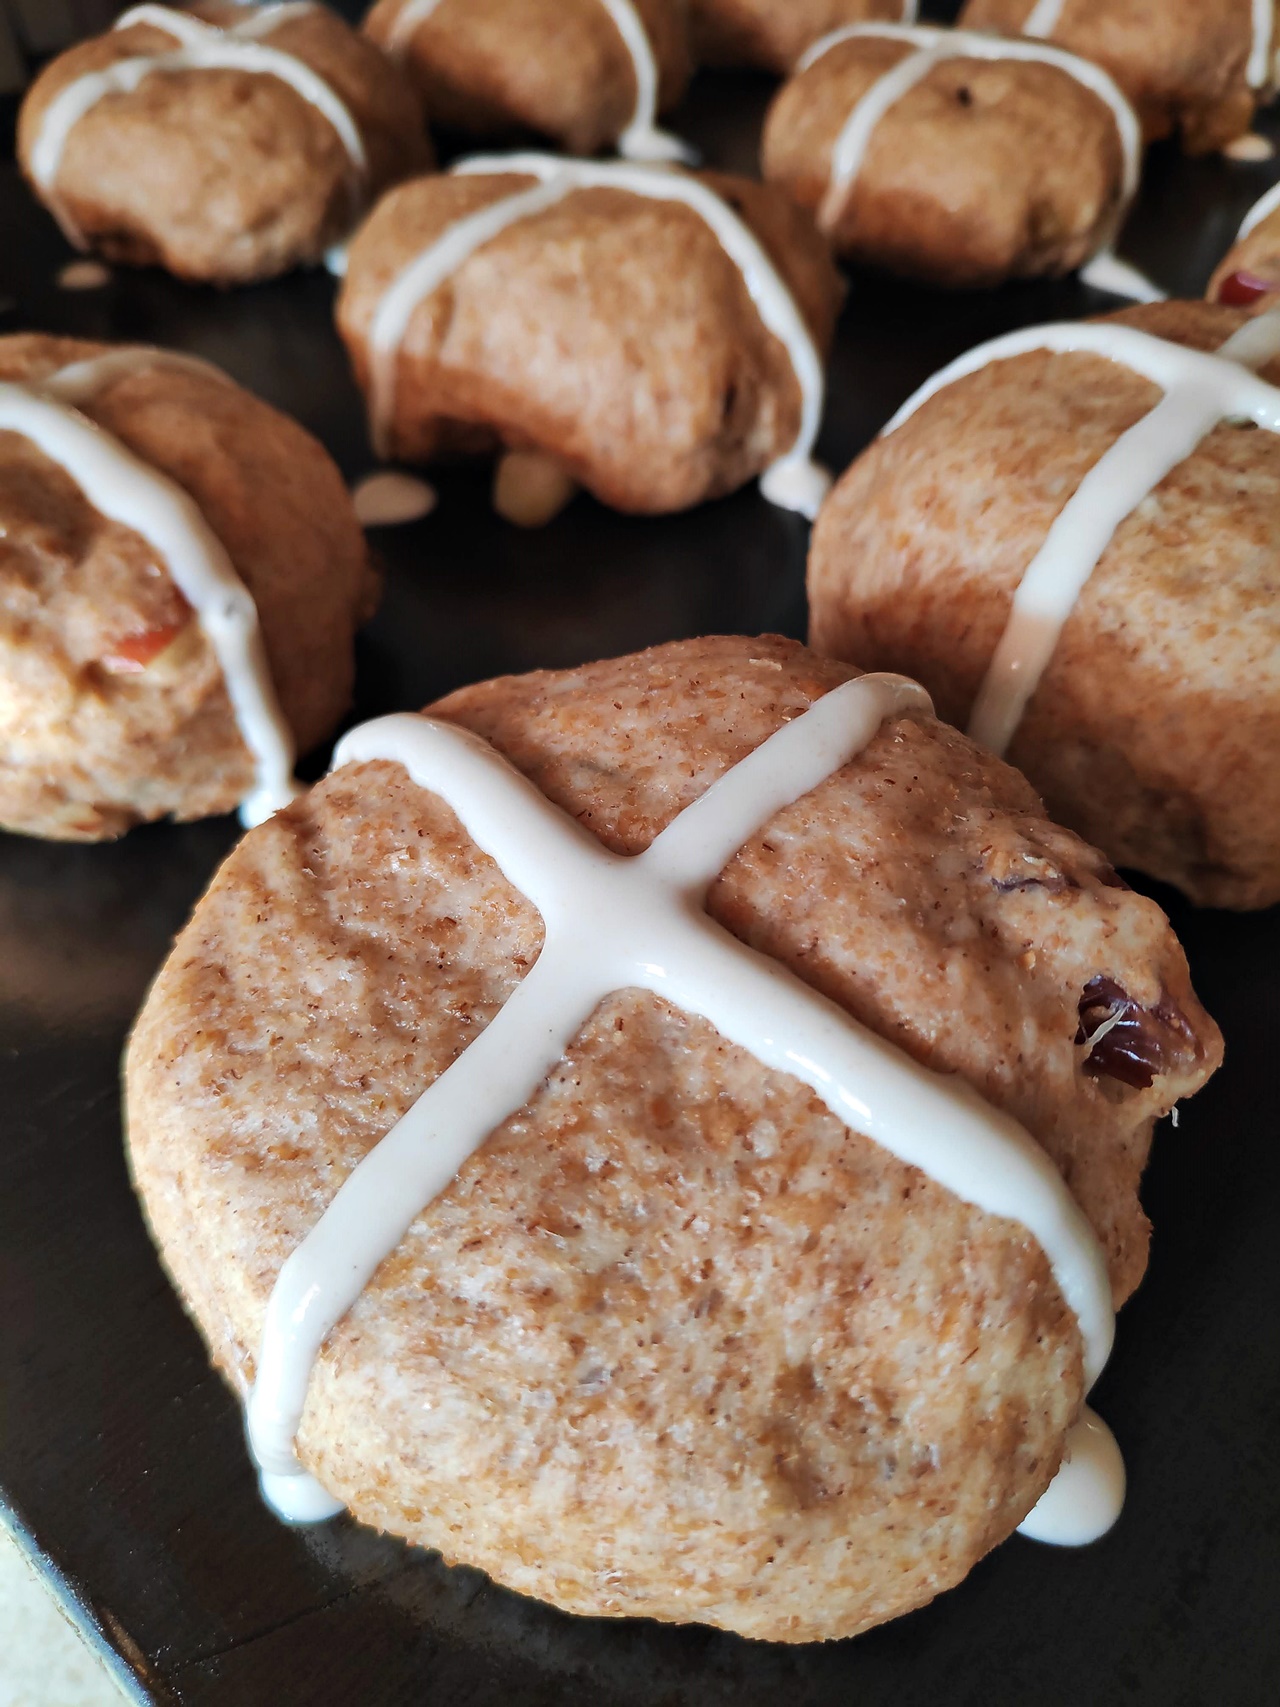 Wholemeal Apple Hot Cross Buns with flour & water crosses before baking.